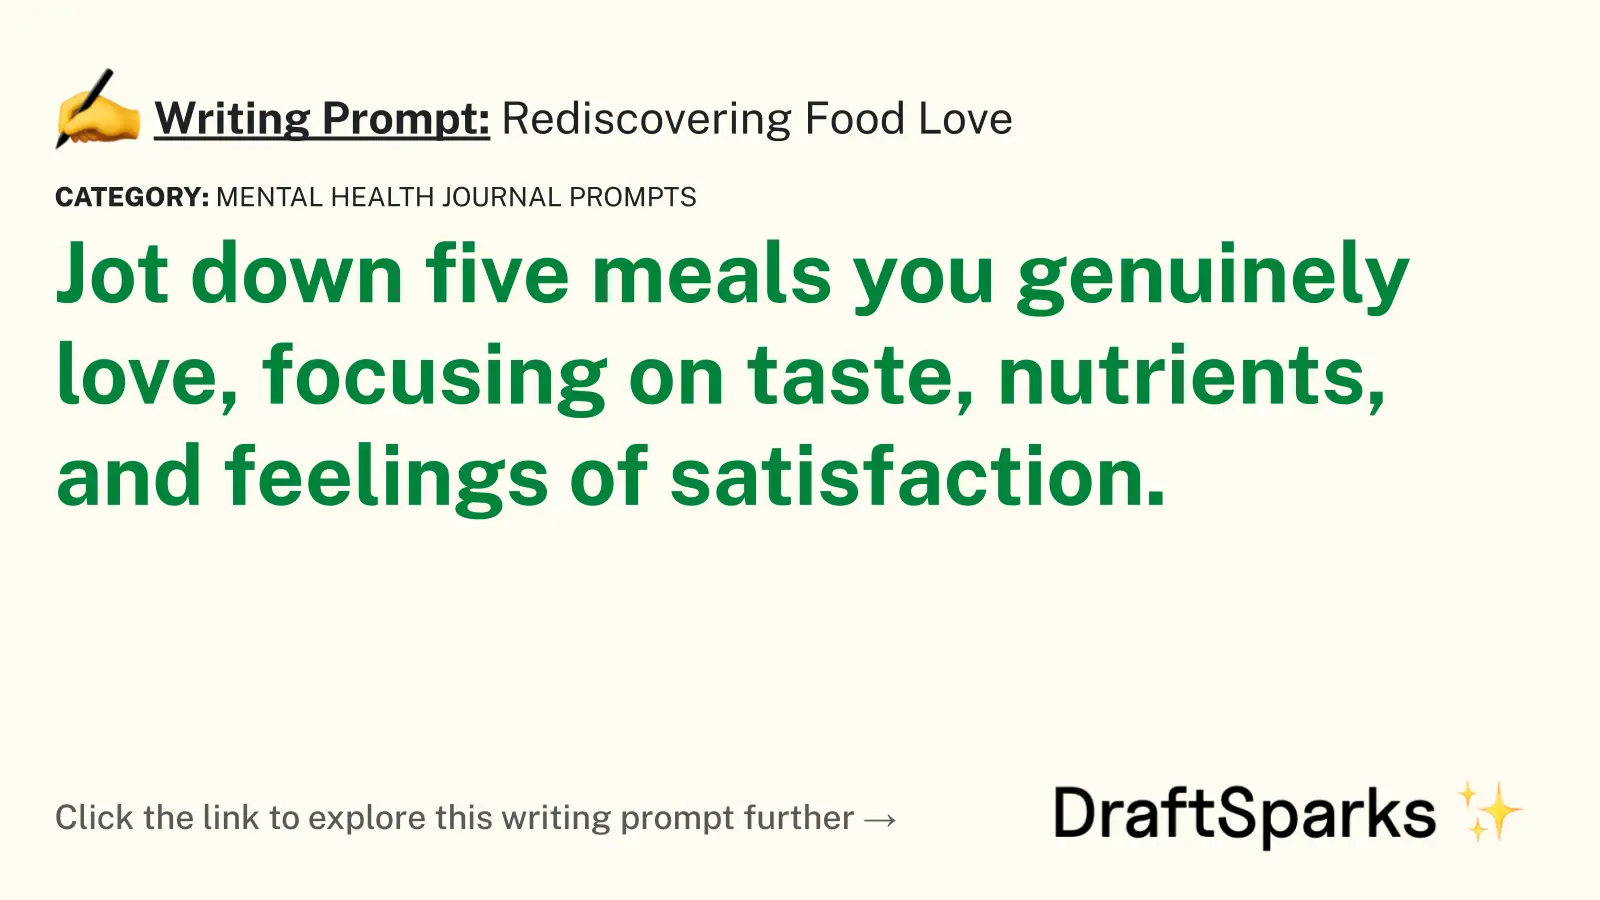 Rediscovering Food Love